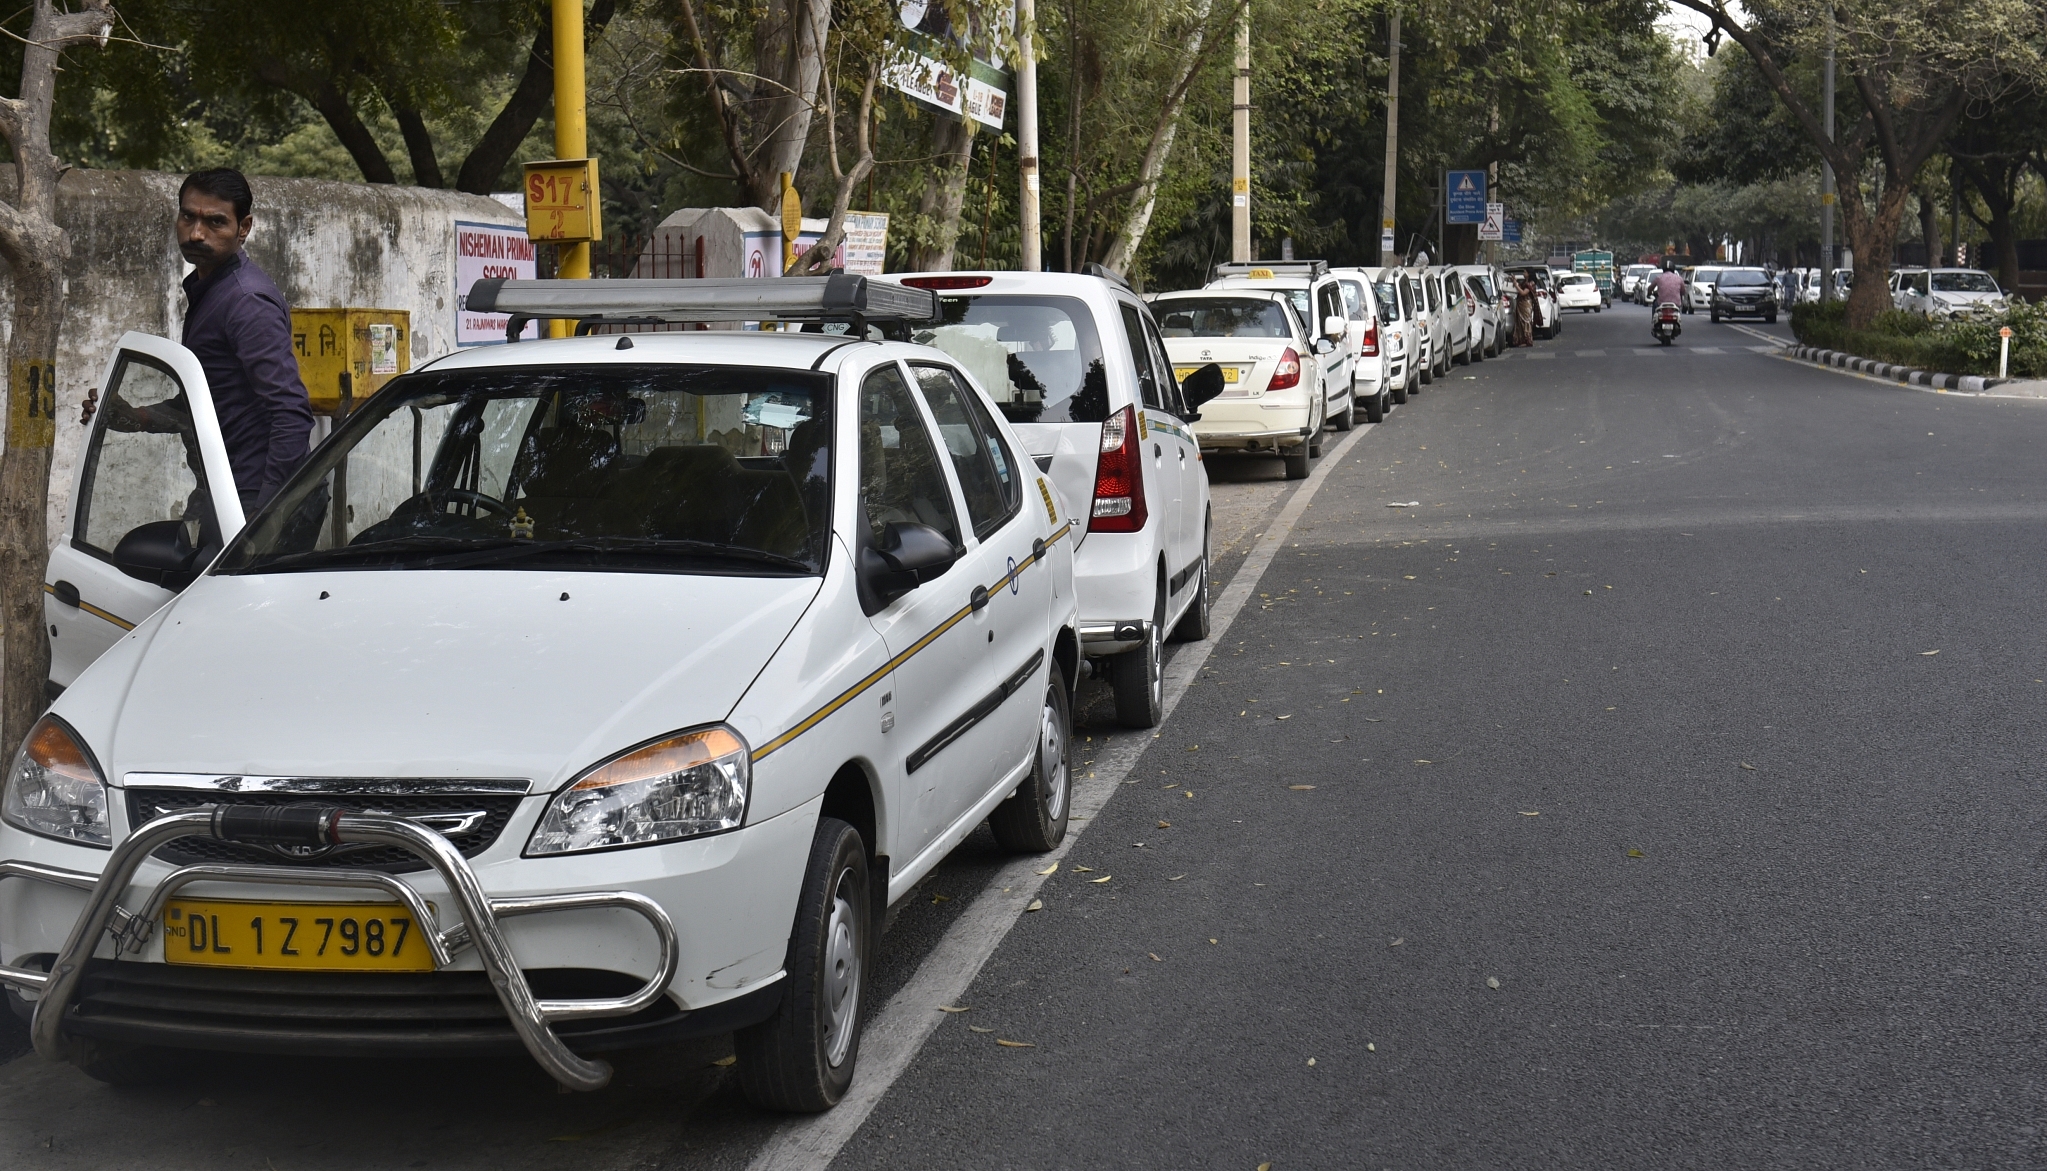 Ola and Uber Cabs in Delhi. (Sushil Kumar/Hindustan Times via Getty Images)